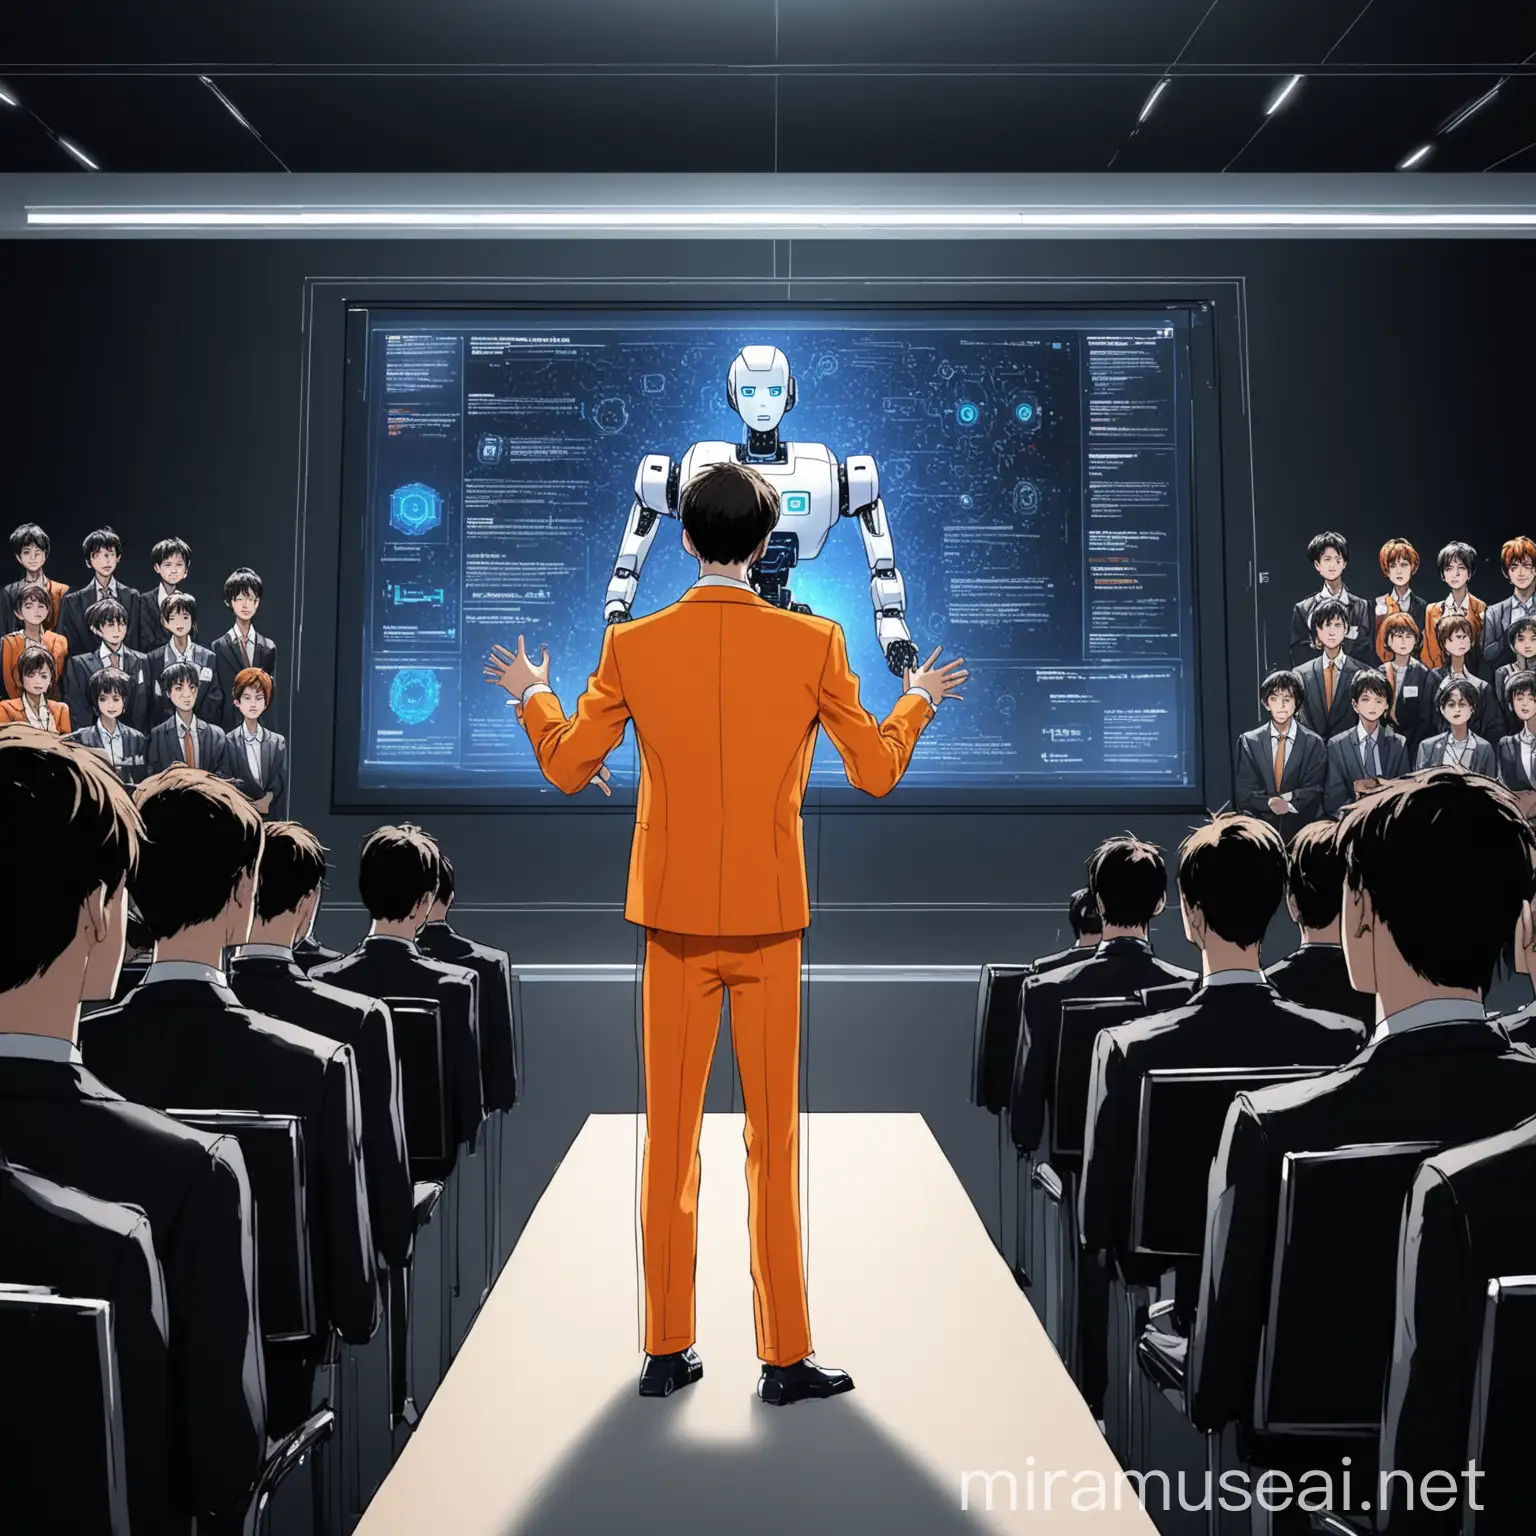 Futuristic Conference AI Robot Presentation by Handsome Man in Orange Suit